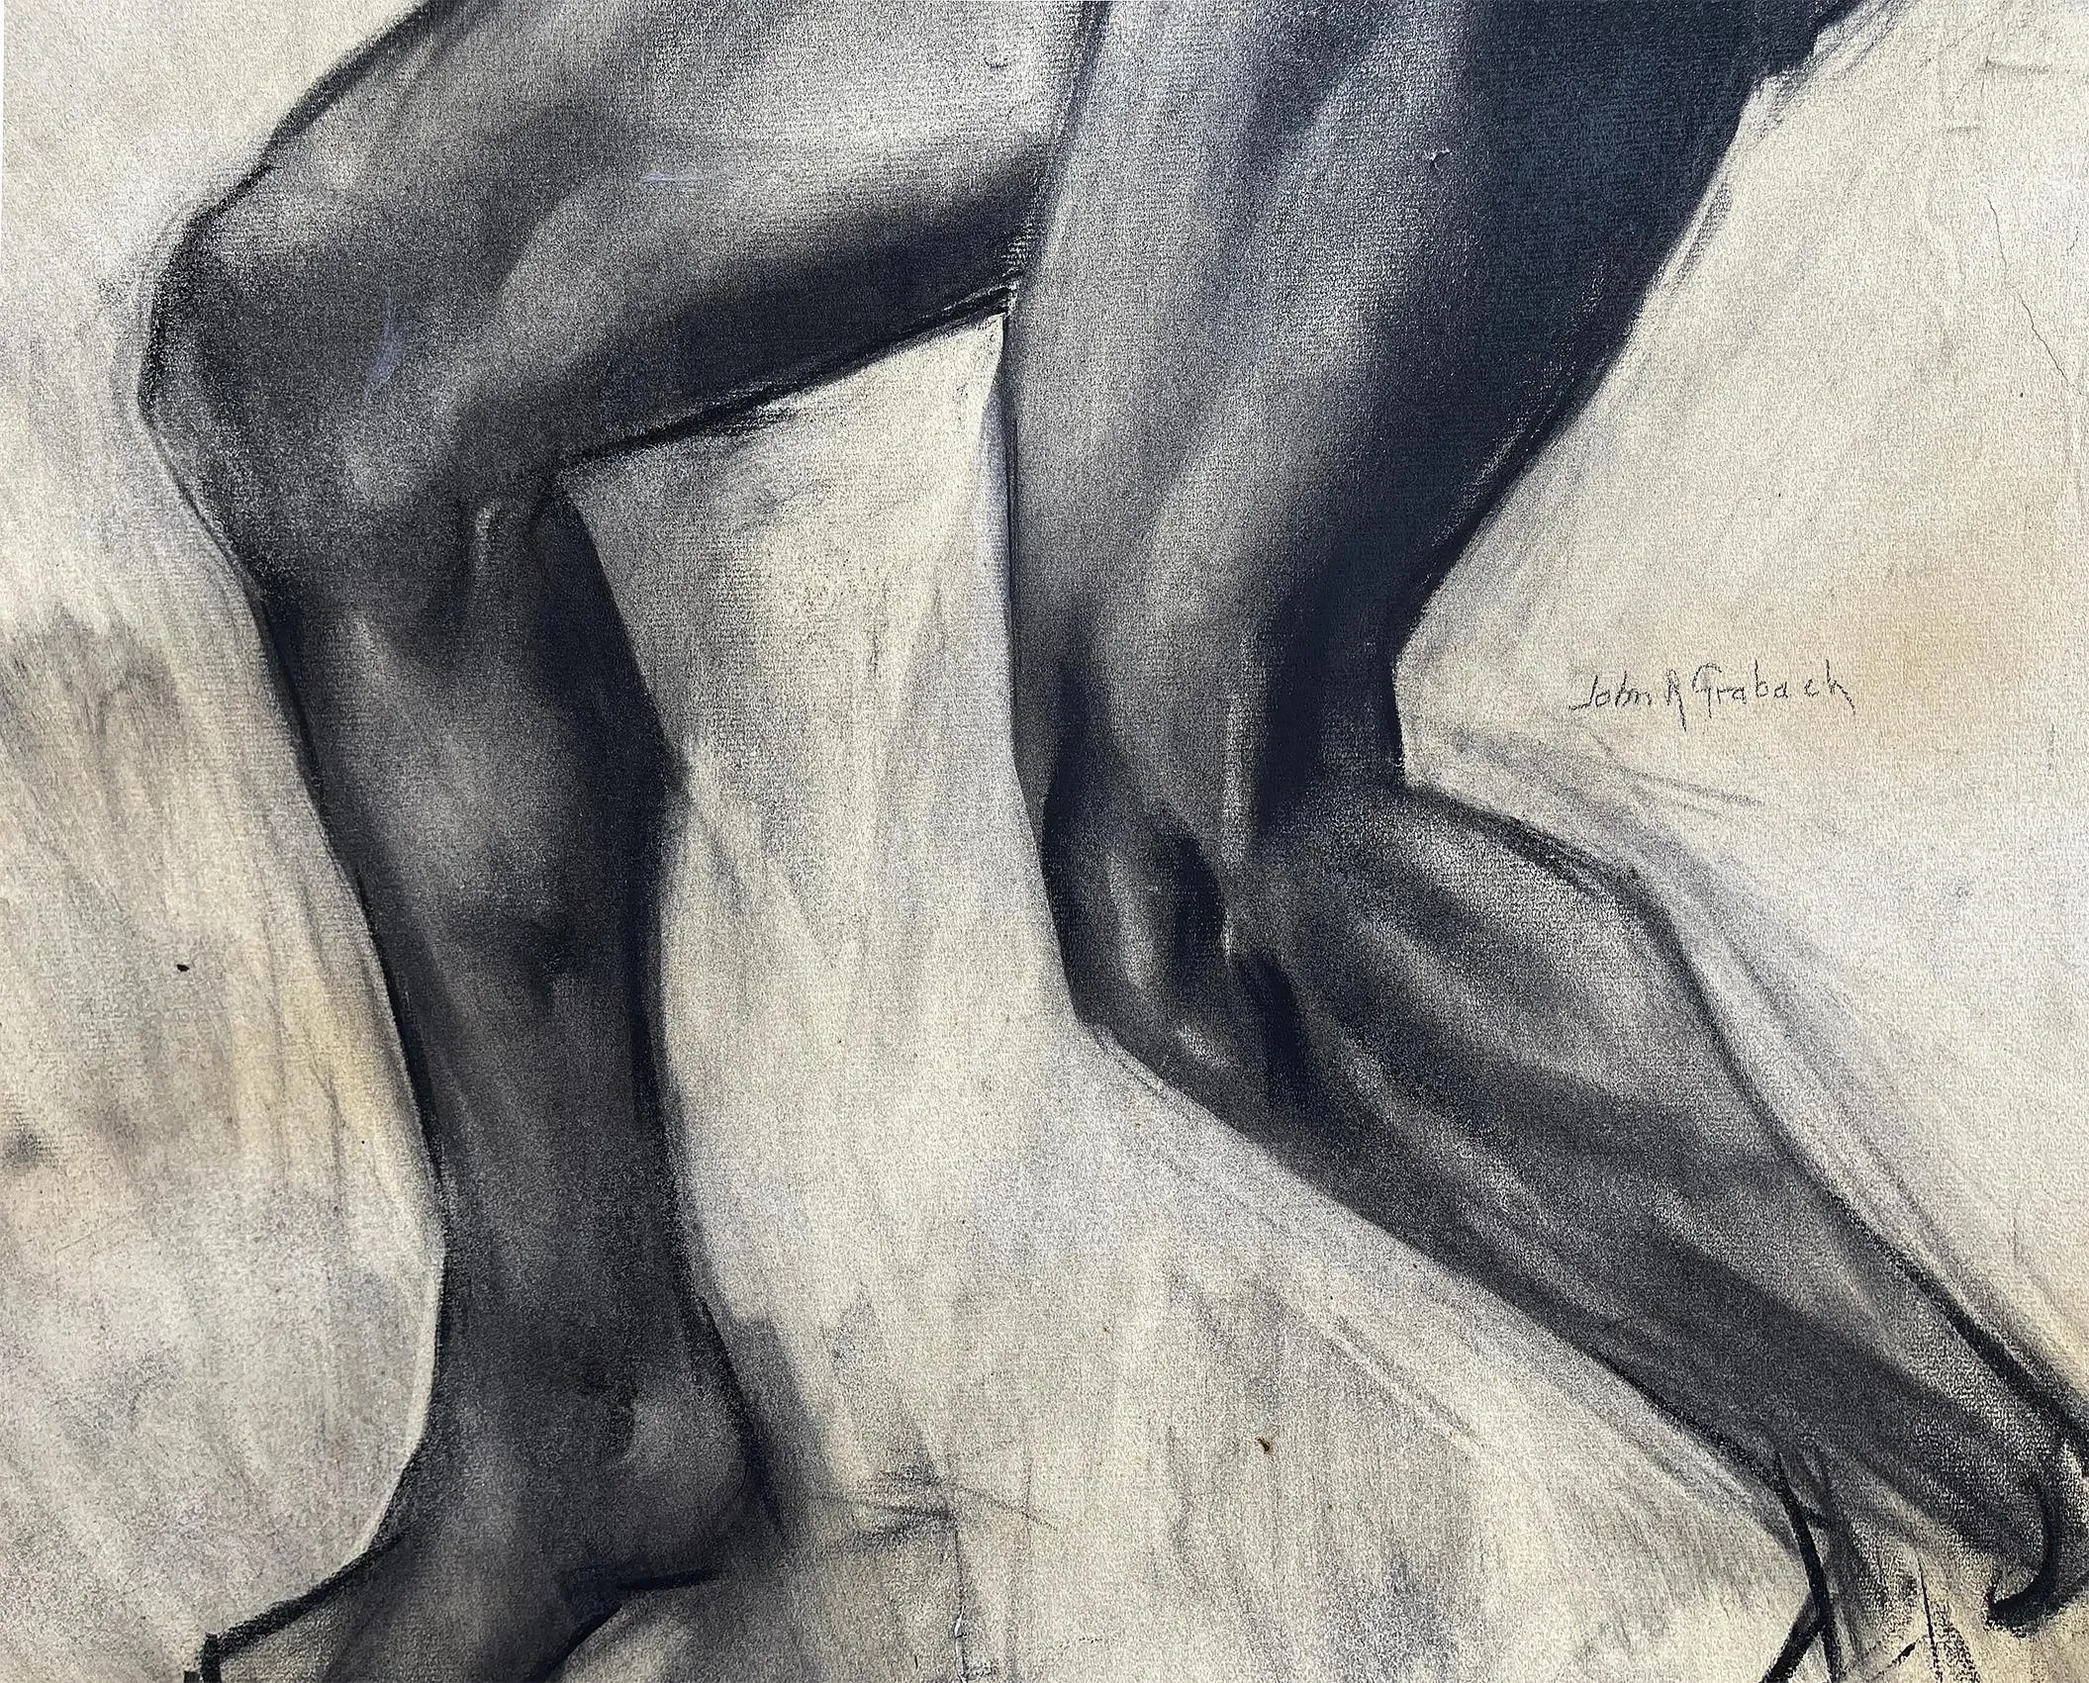 John R. Grabach - Muscular Male Nude with Bulging Muscles Art Deco